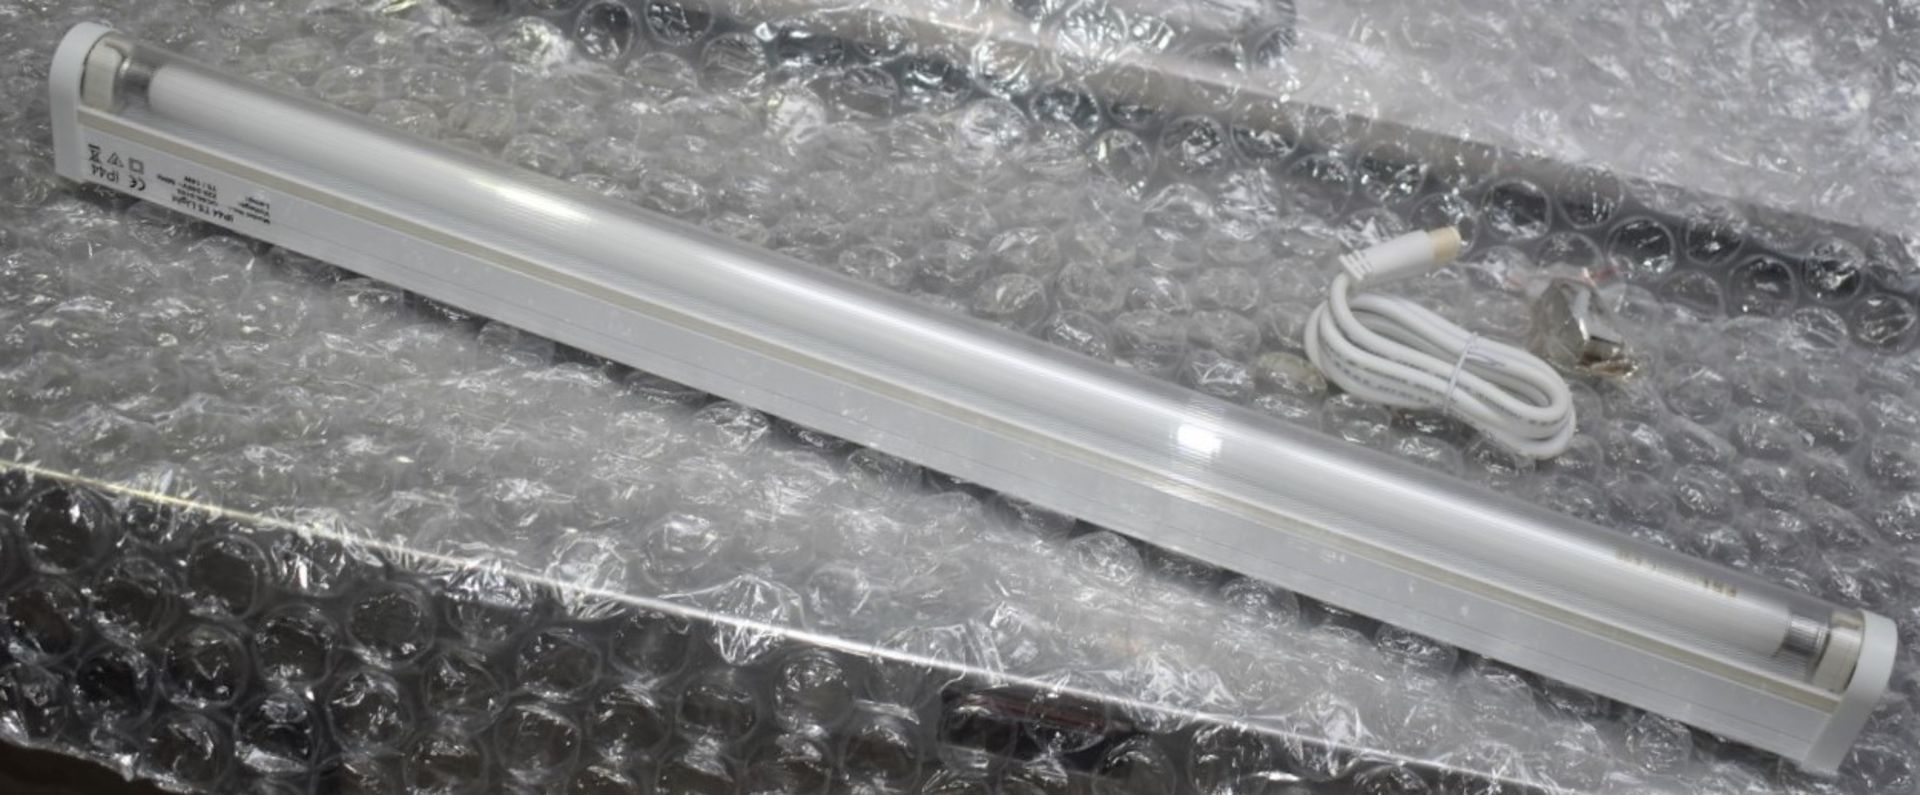 1 x Bathroom Light Fitting - IP44 Waterproof T5 14w Fluorescent Lights With Built-In Electronic - Image 8 of 11